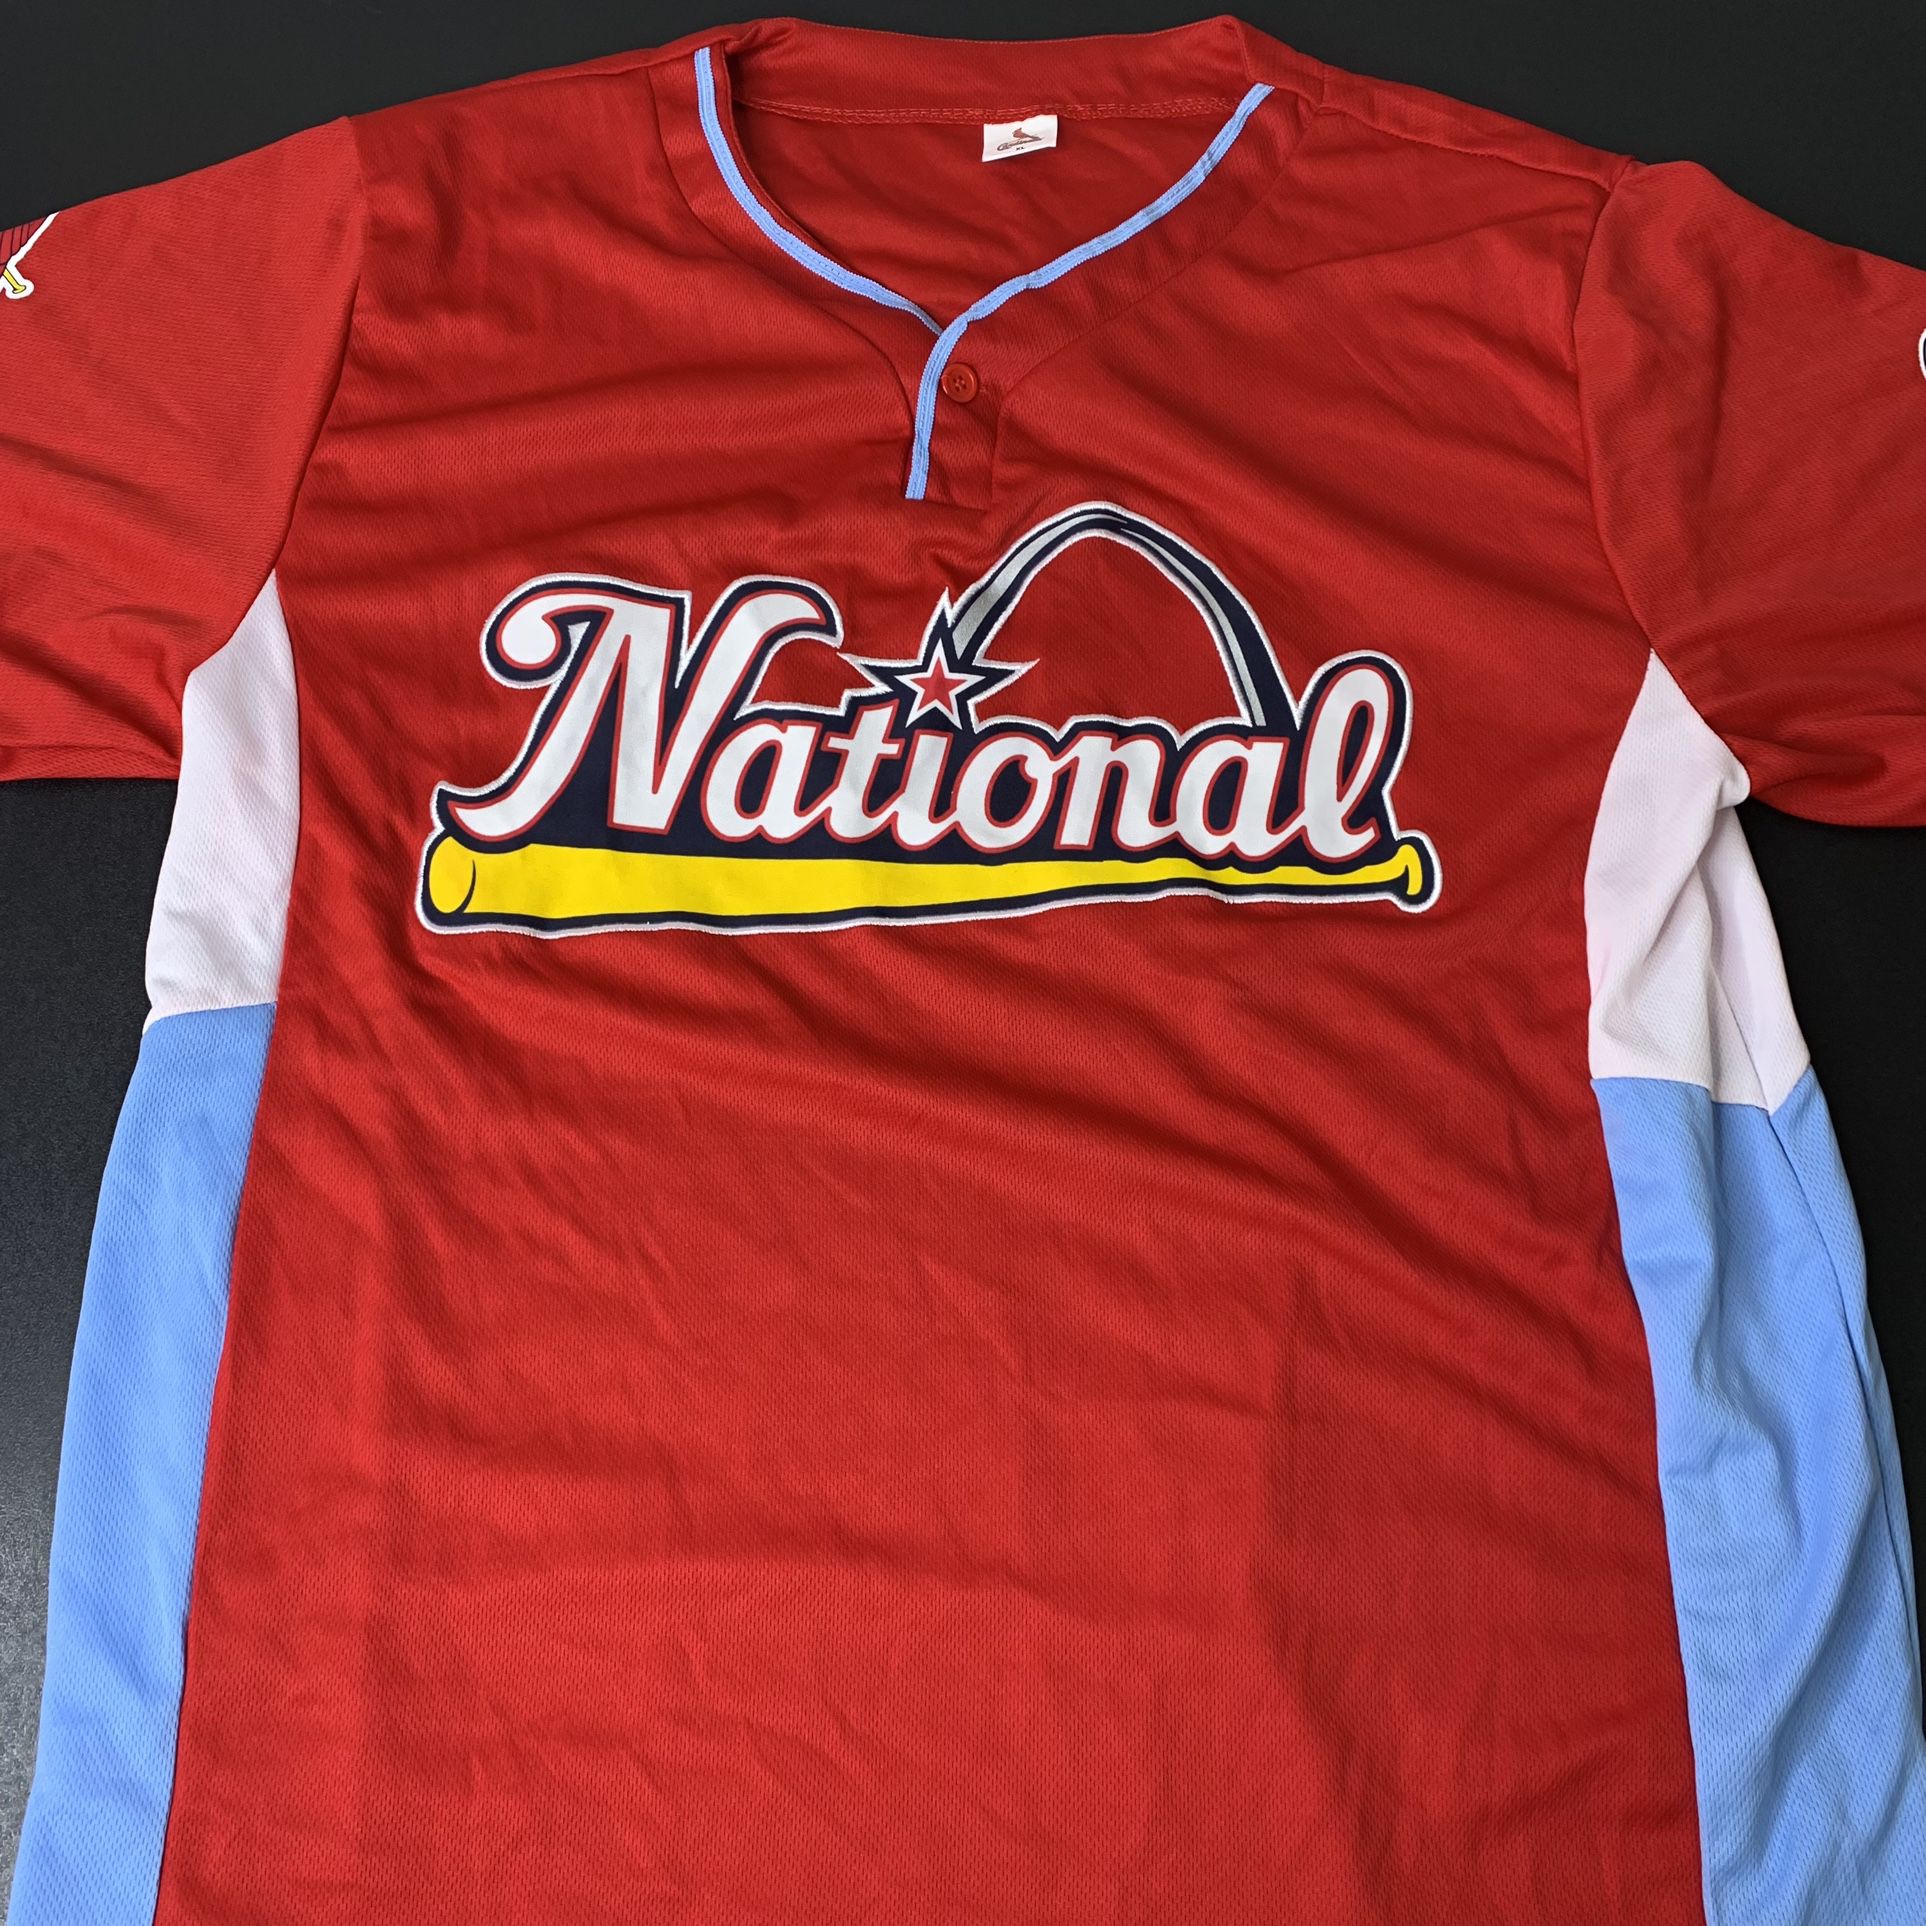 St. Louis Cardinals All-Star Game MLB Jerseys for sale